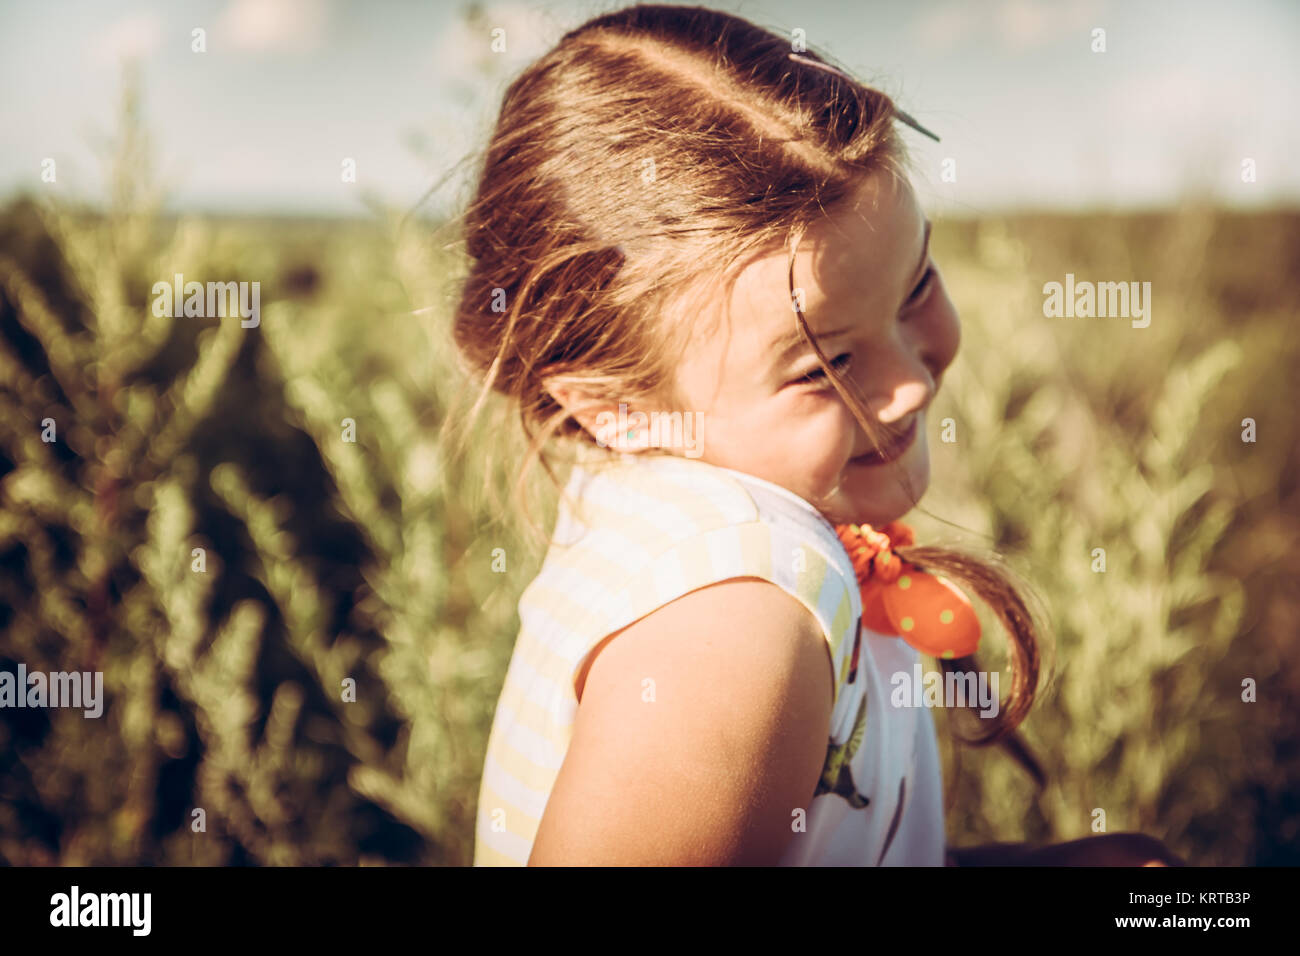 Cute shy plumpy girl in summer rural field in countryside during summer holidays symbolizing happy carefree childhood Stock Photo